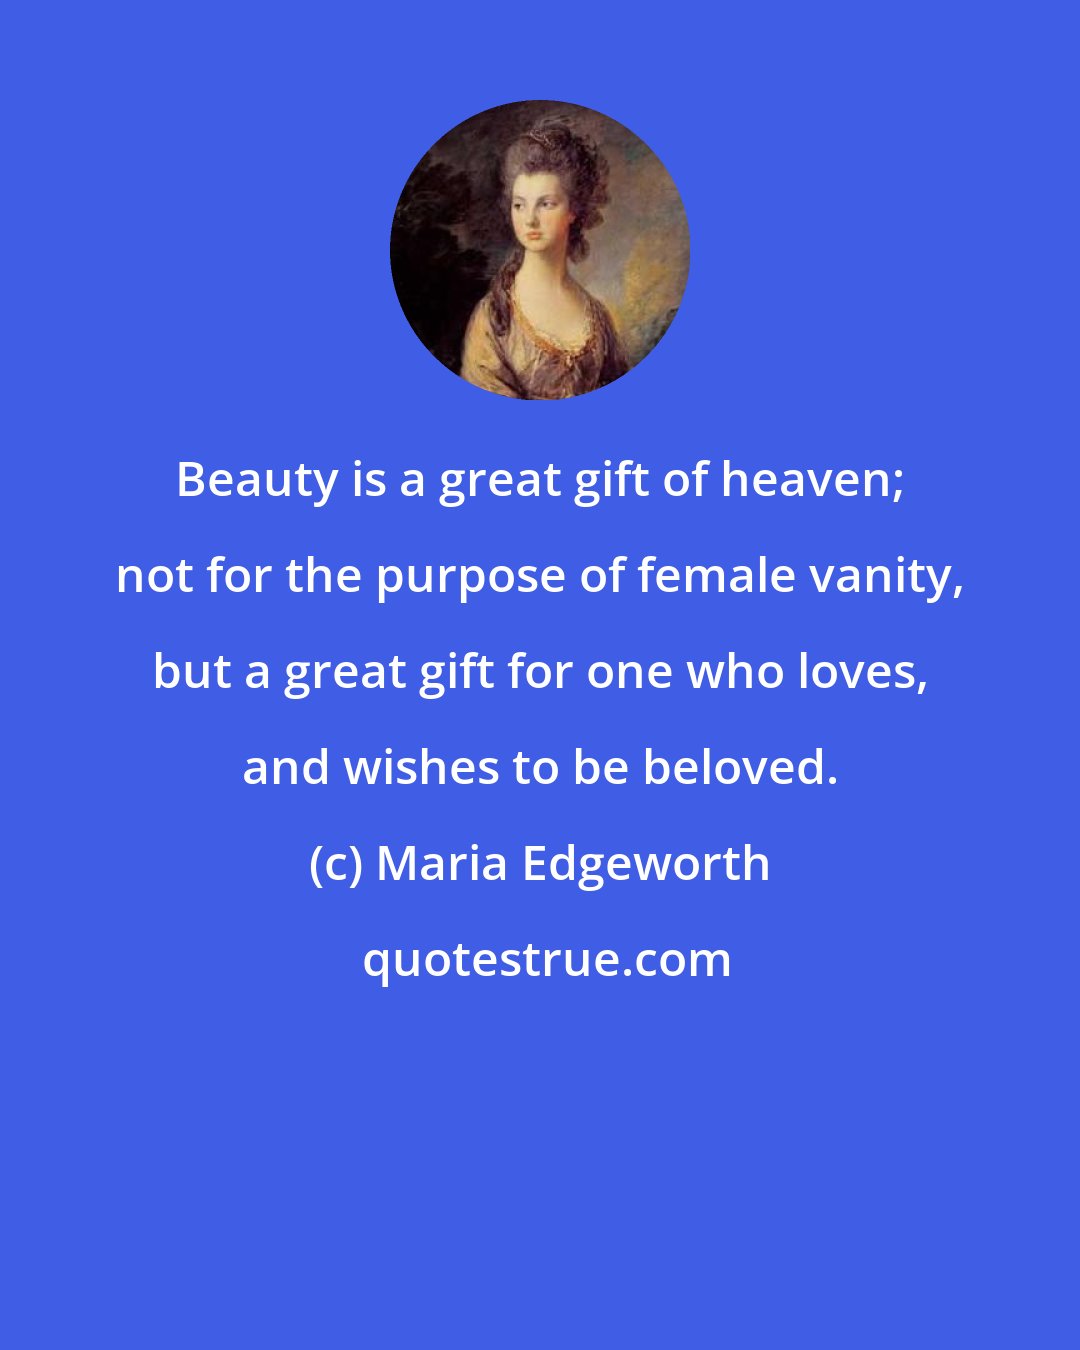 Maria Edgeworth: Beauty is a great gift of heaven; not for the purpose of female vanity, but a great gift for one who loves, and wishes to be beloved.